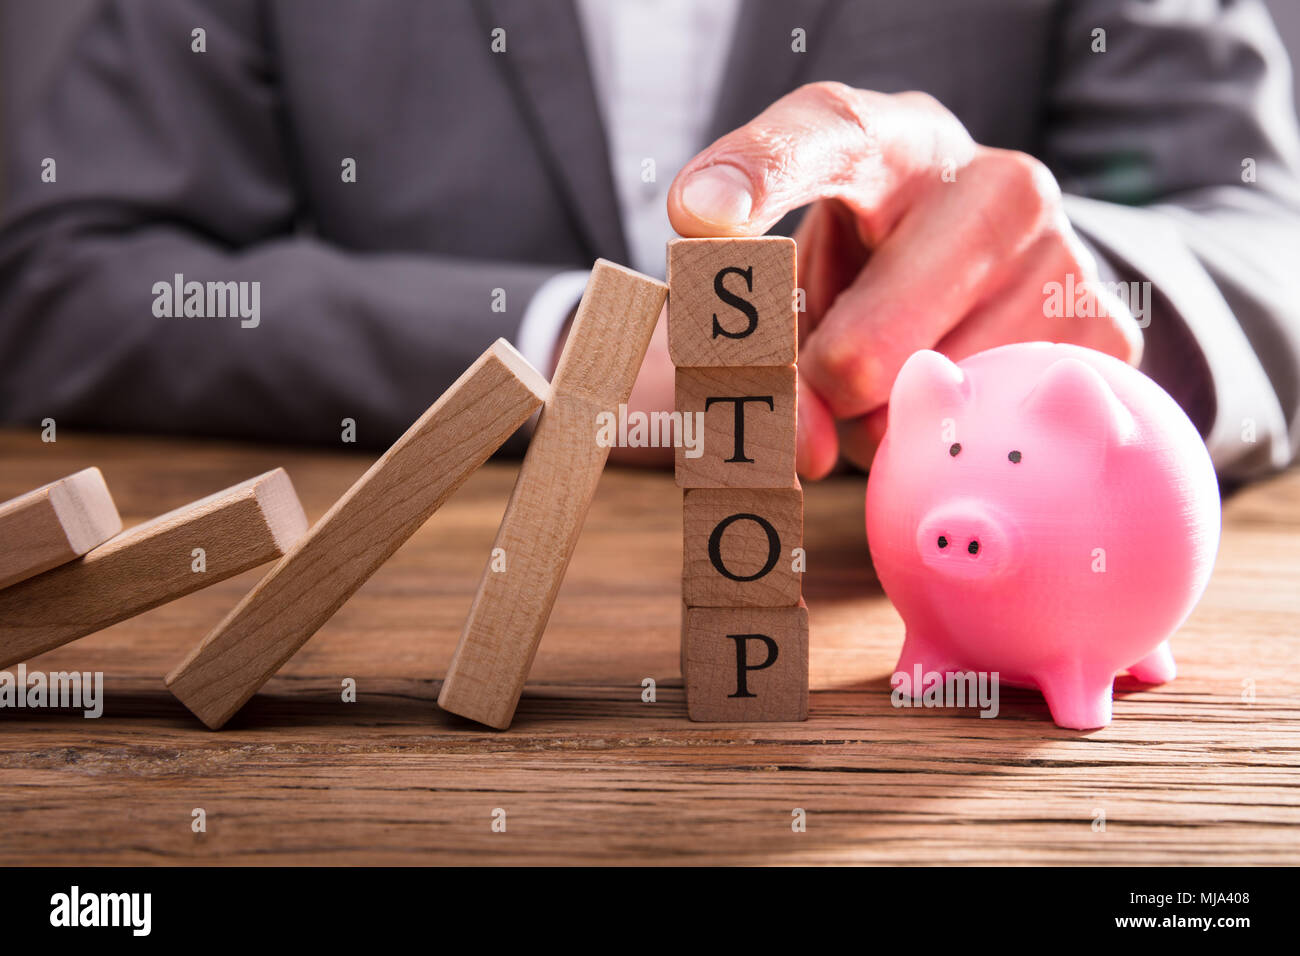 Person's Finger On Stop Wooden Blocks Stopping Dominos From Falling Over Piggybank Stock Photo